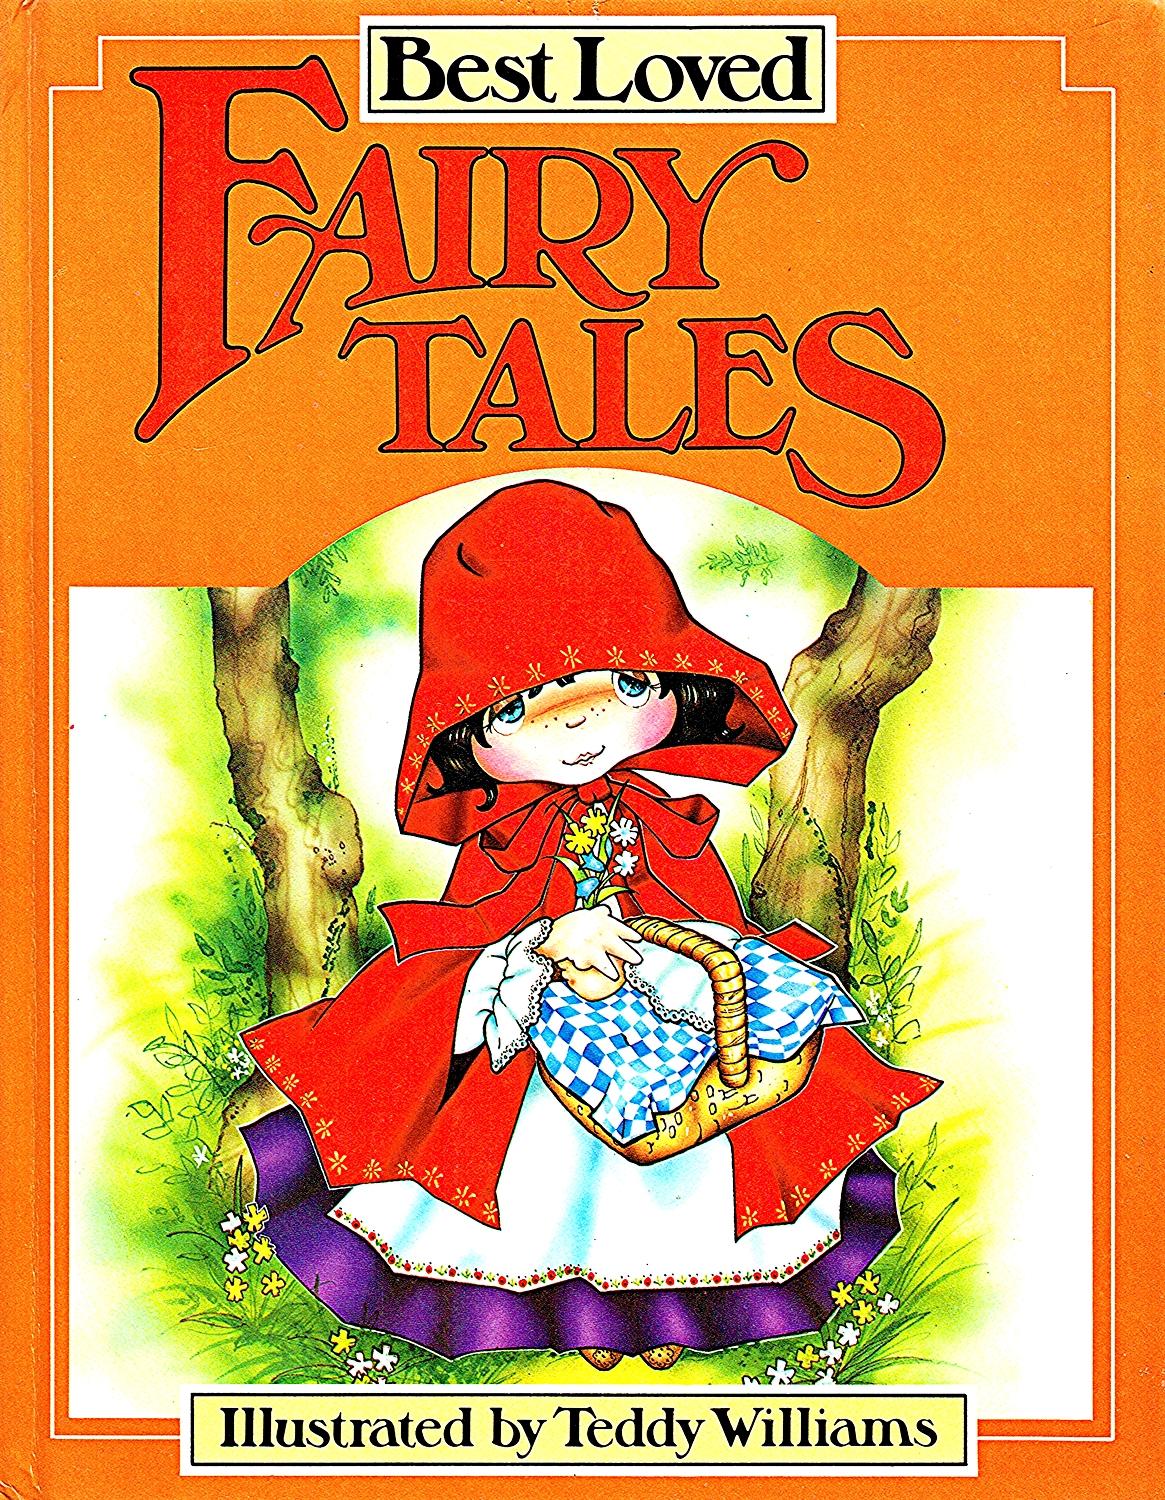 Best Loved Fairy Tales By Lis Robson Retold Illustrator Teddy Williams Very Good Hardcover 1979 1st Edition Sapphire Books